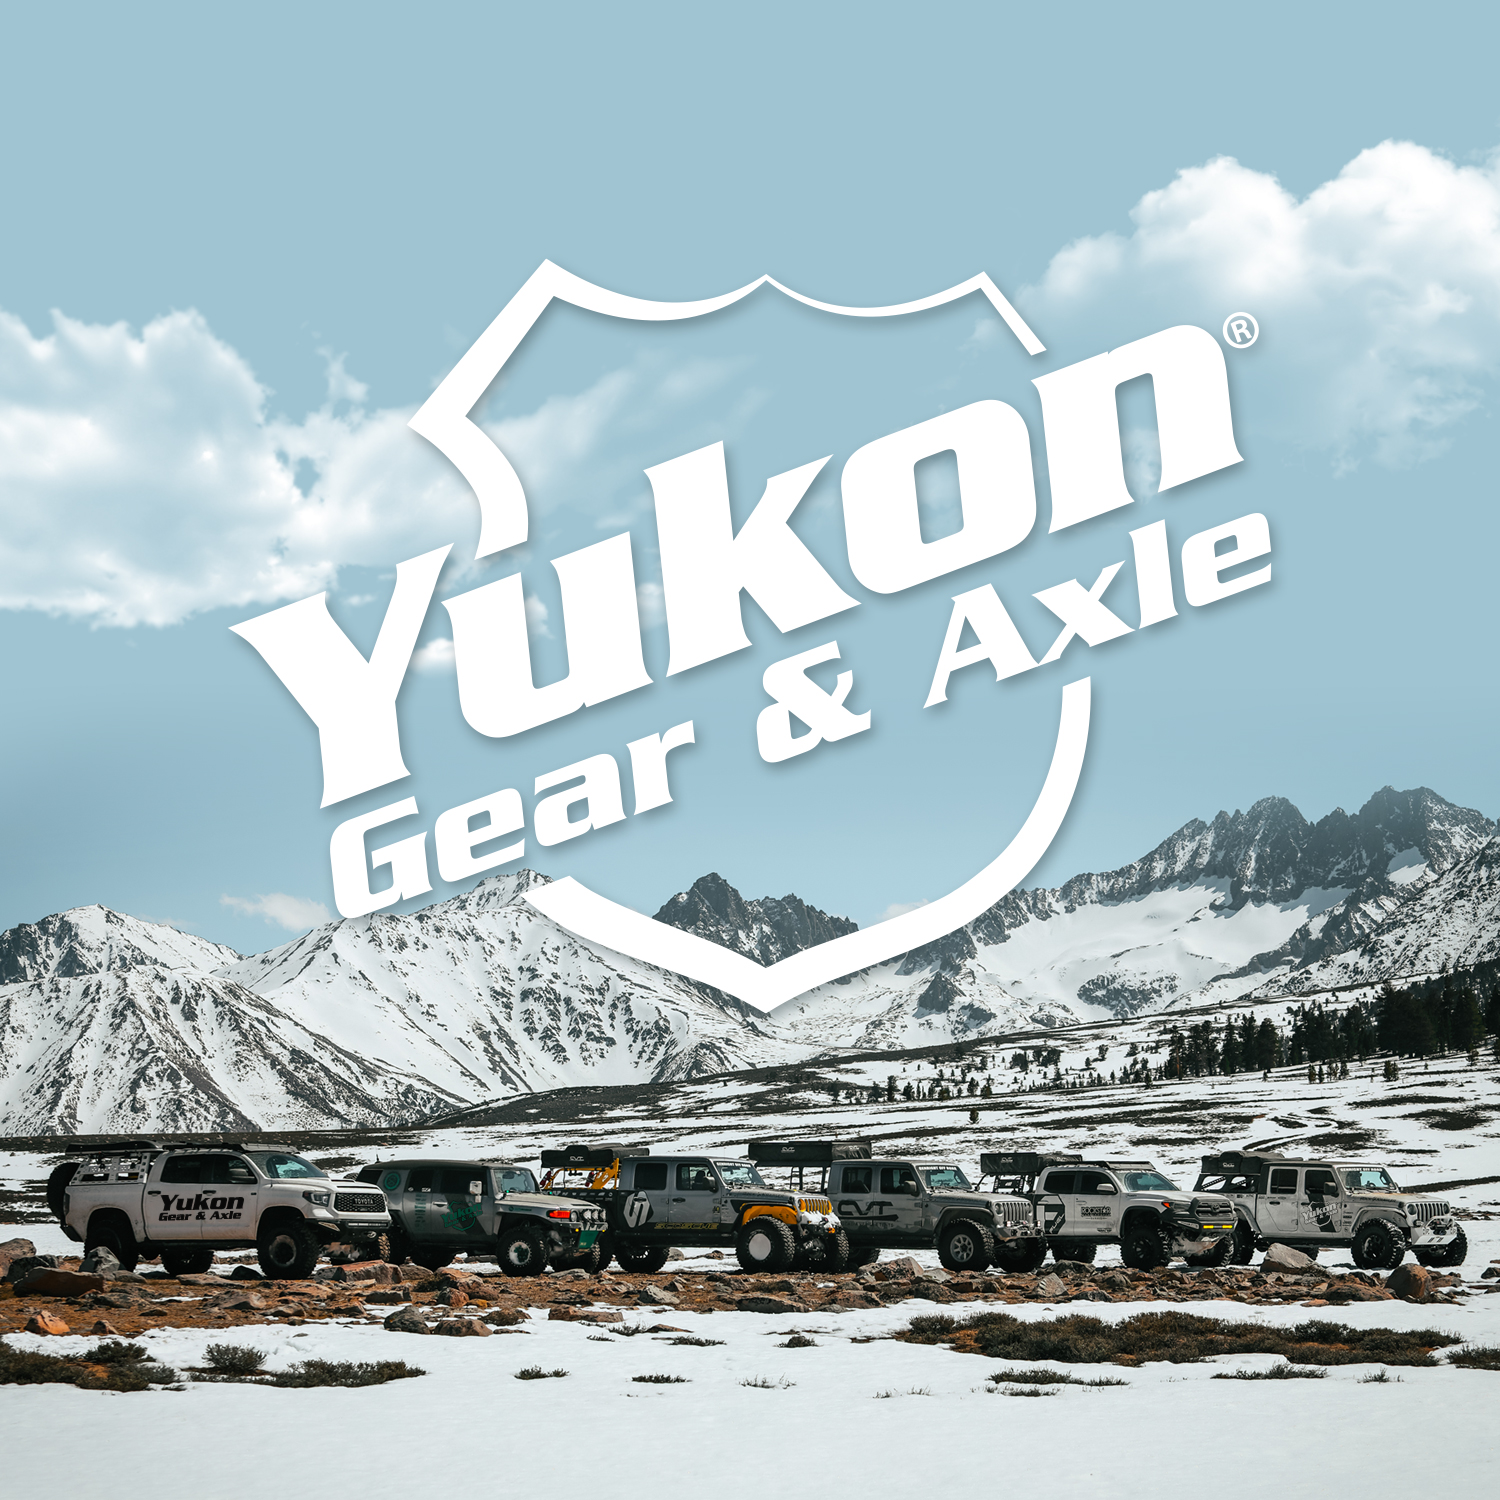 Yukon Bearing install kit for '98-'13r GM 9.5" differential 